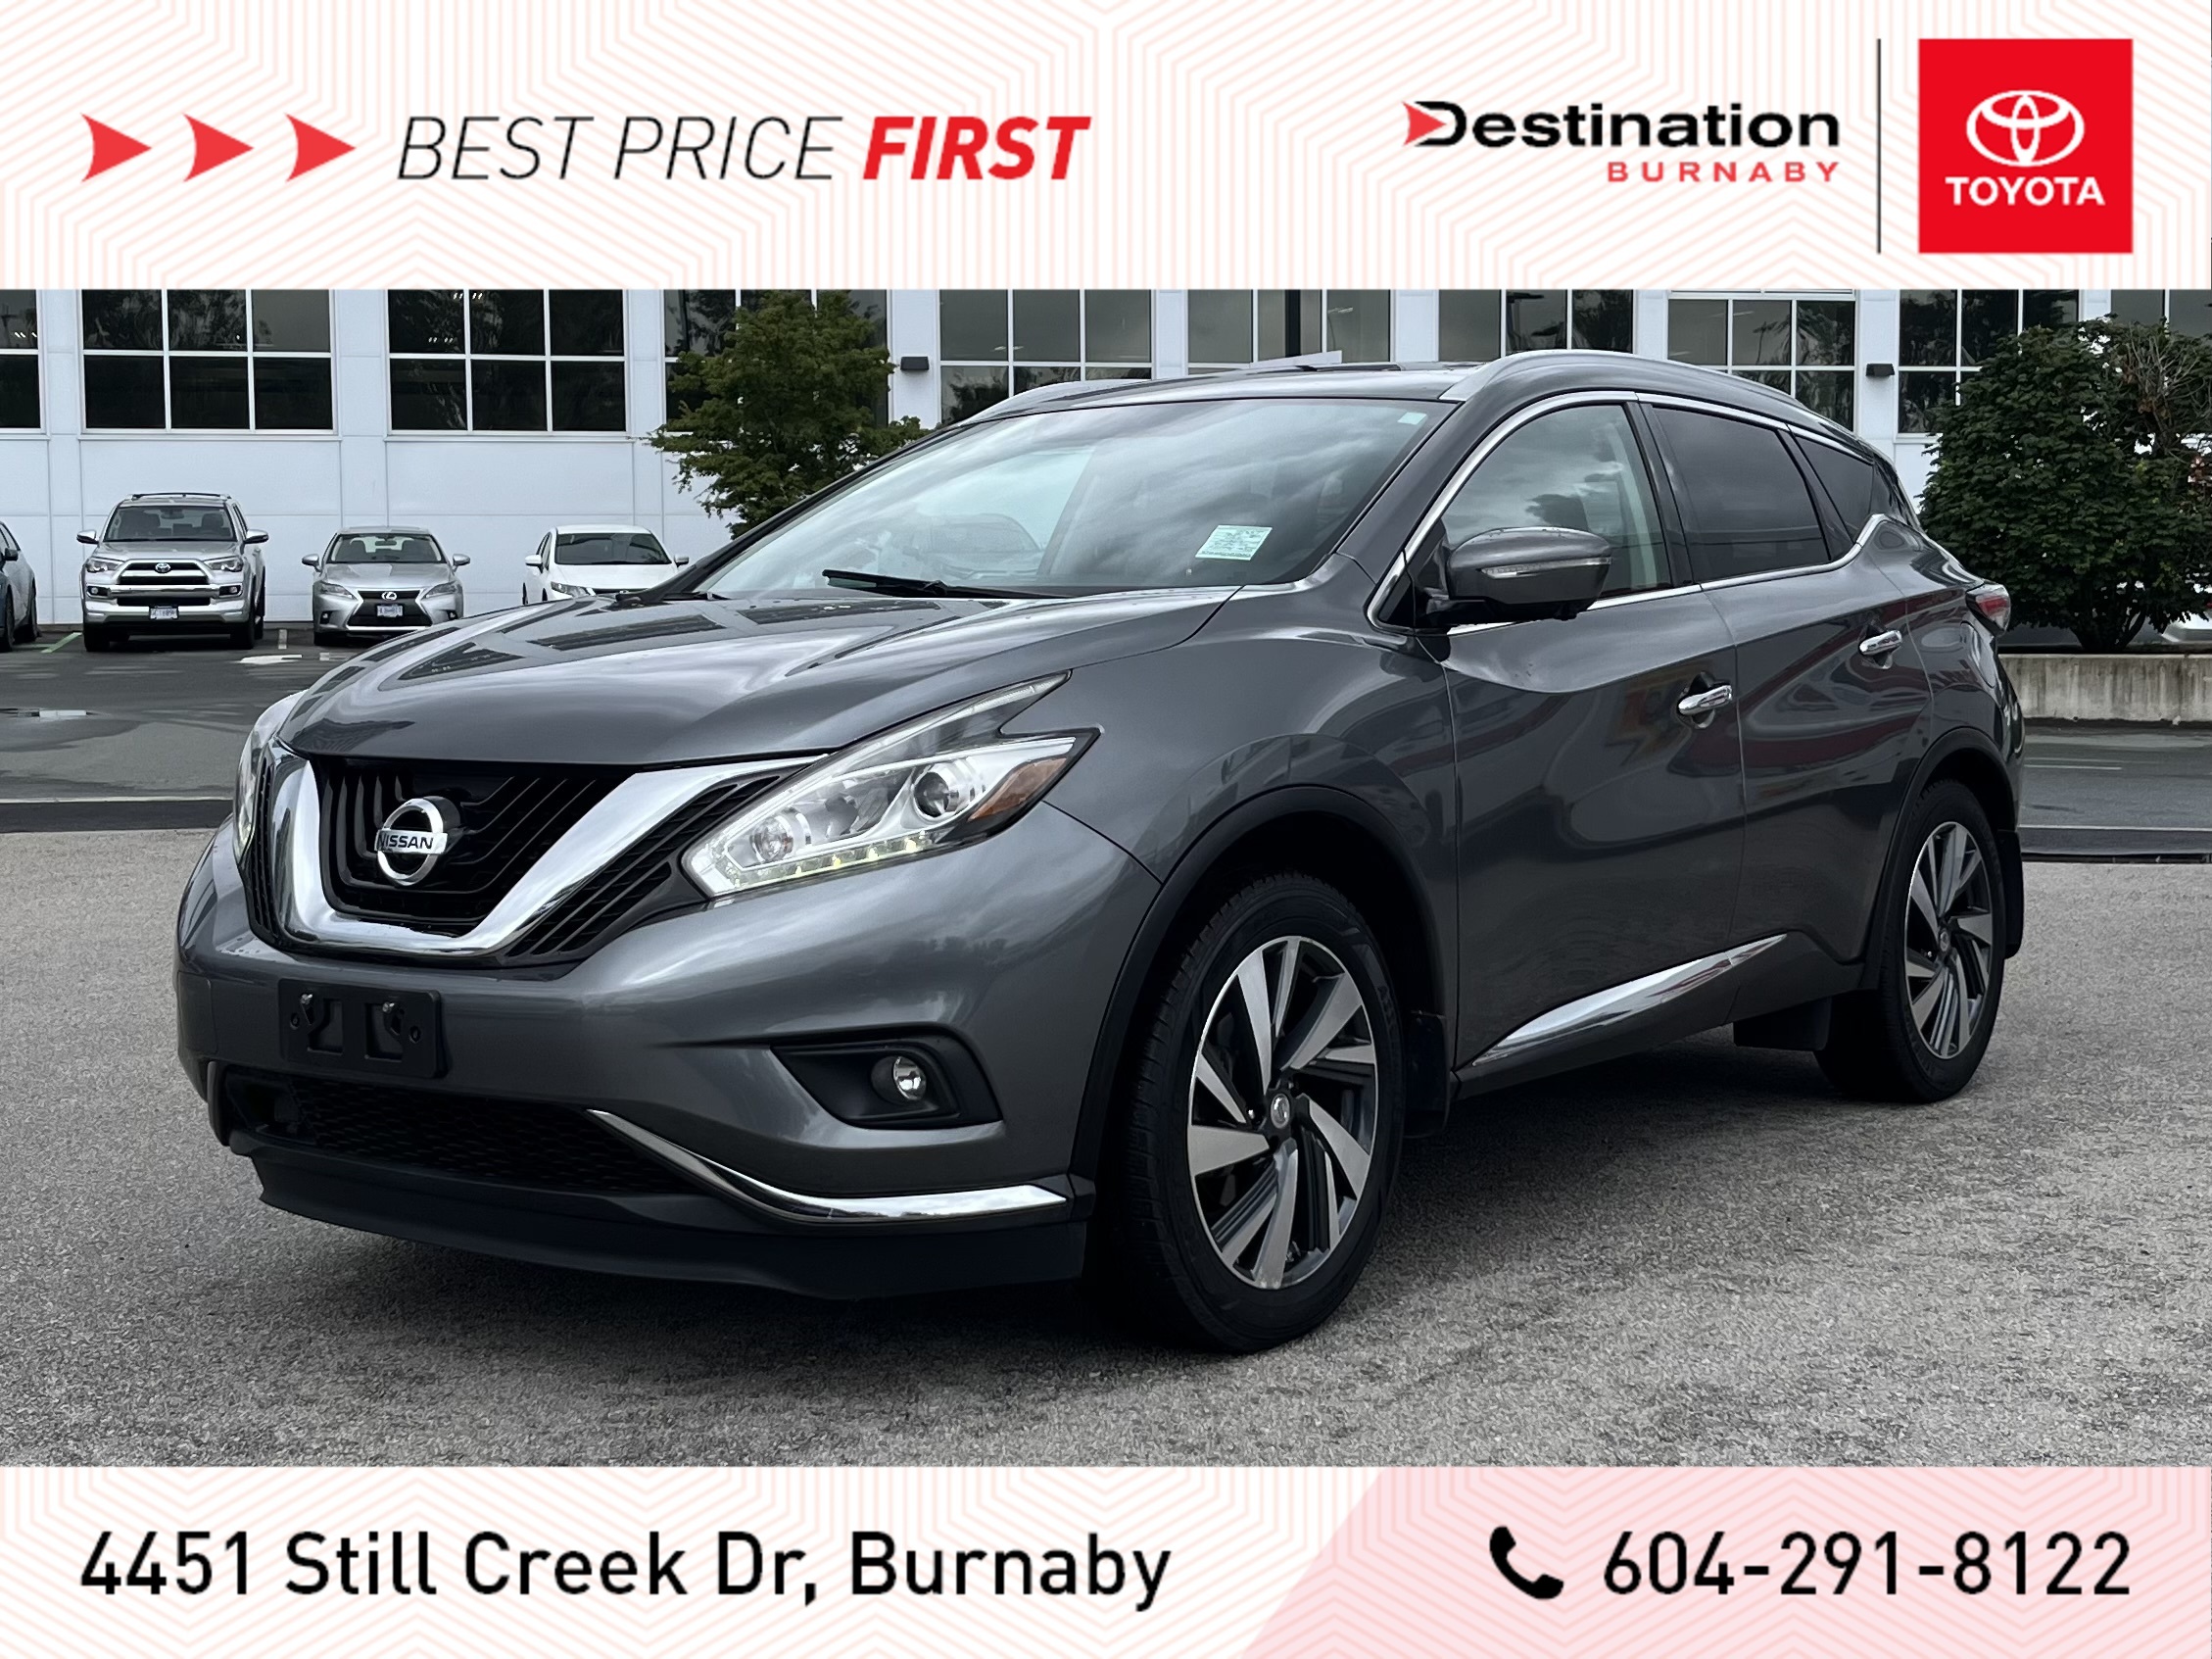 2015 Nissan Murano Platinum, No accidents, Loaded